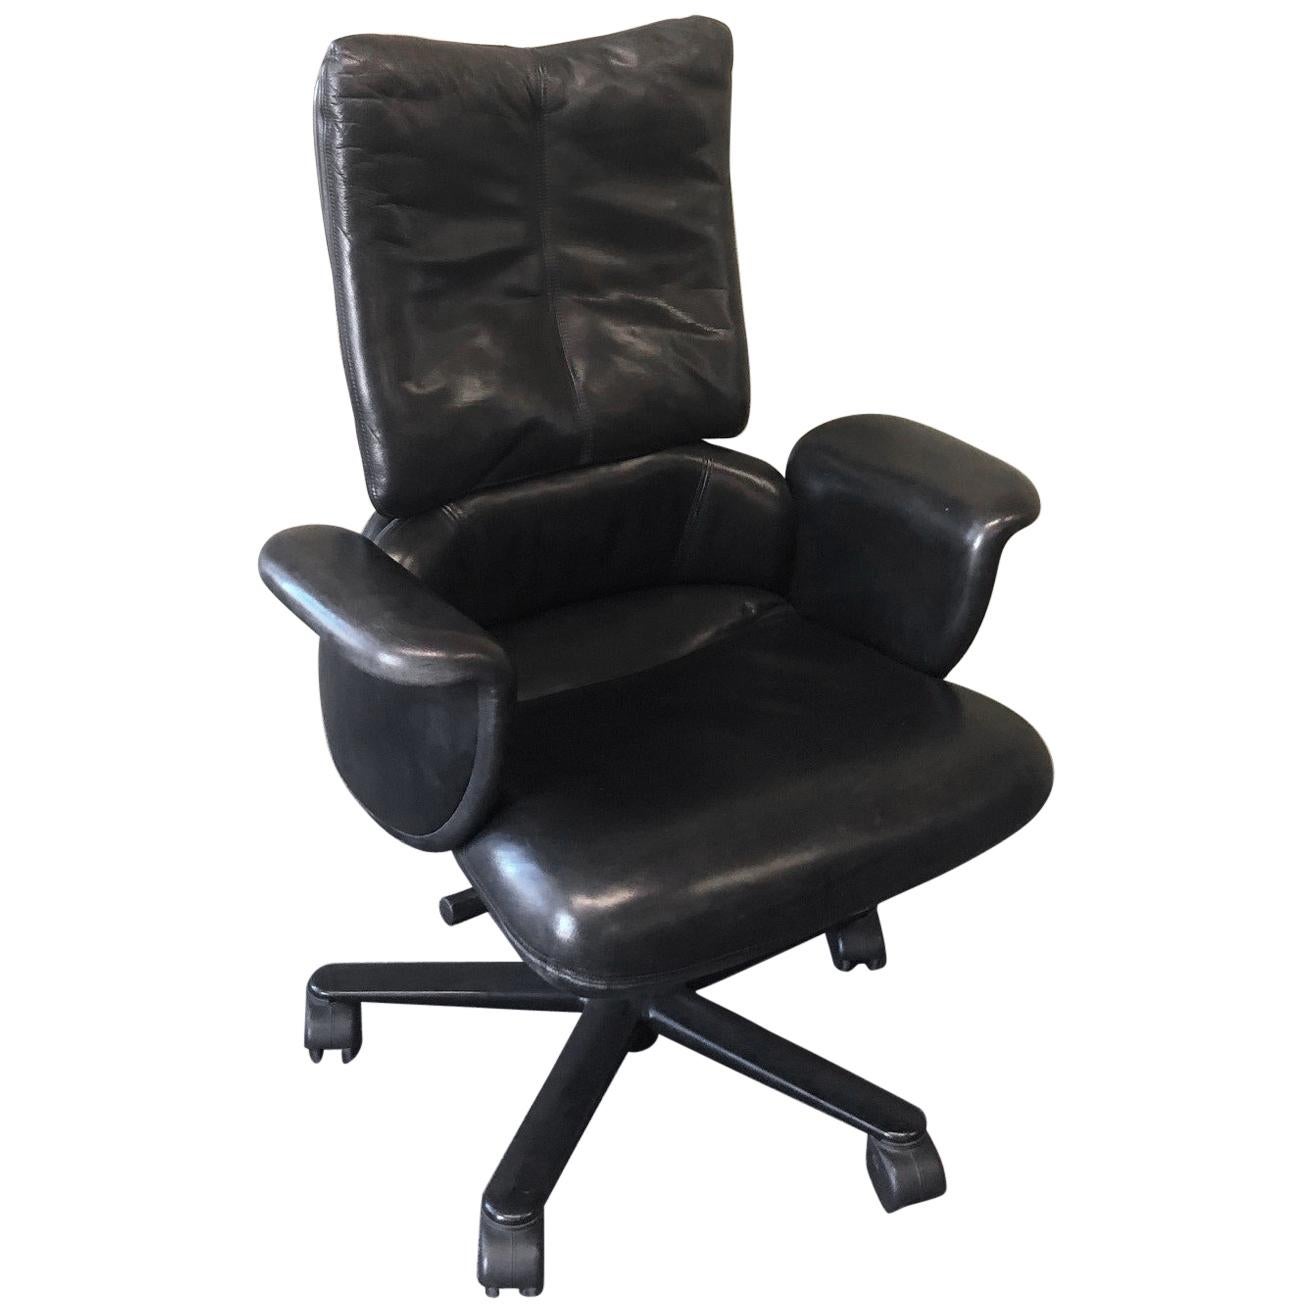 Executive High Back Leather Office Chair by Geoff Hollington for Herman Miller